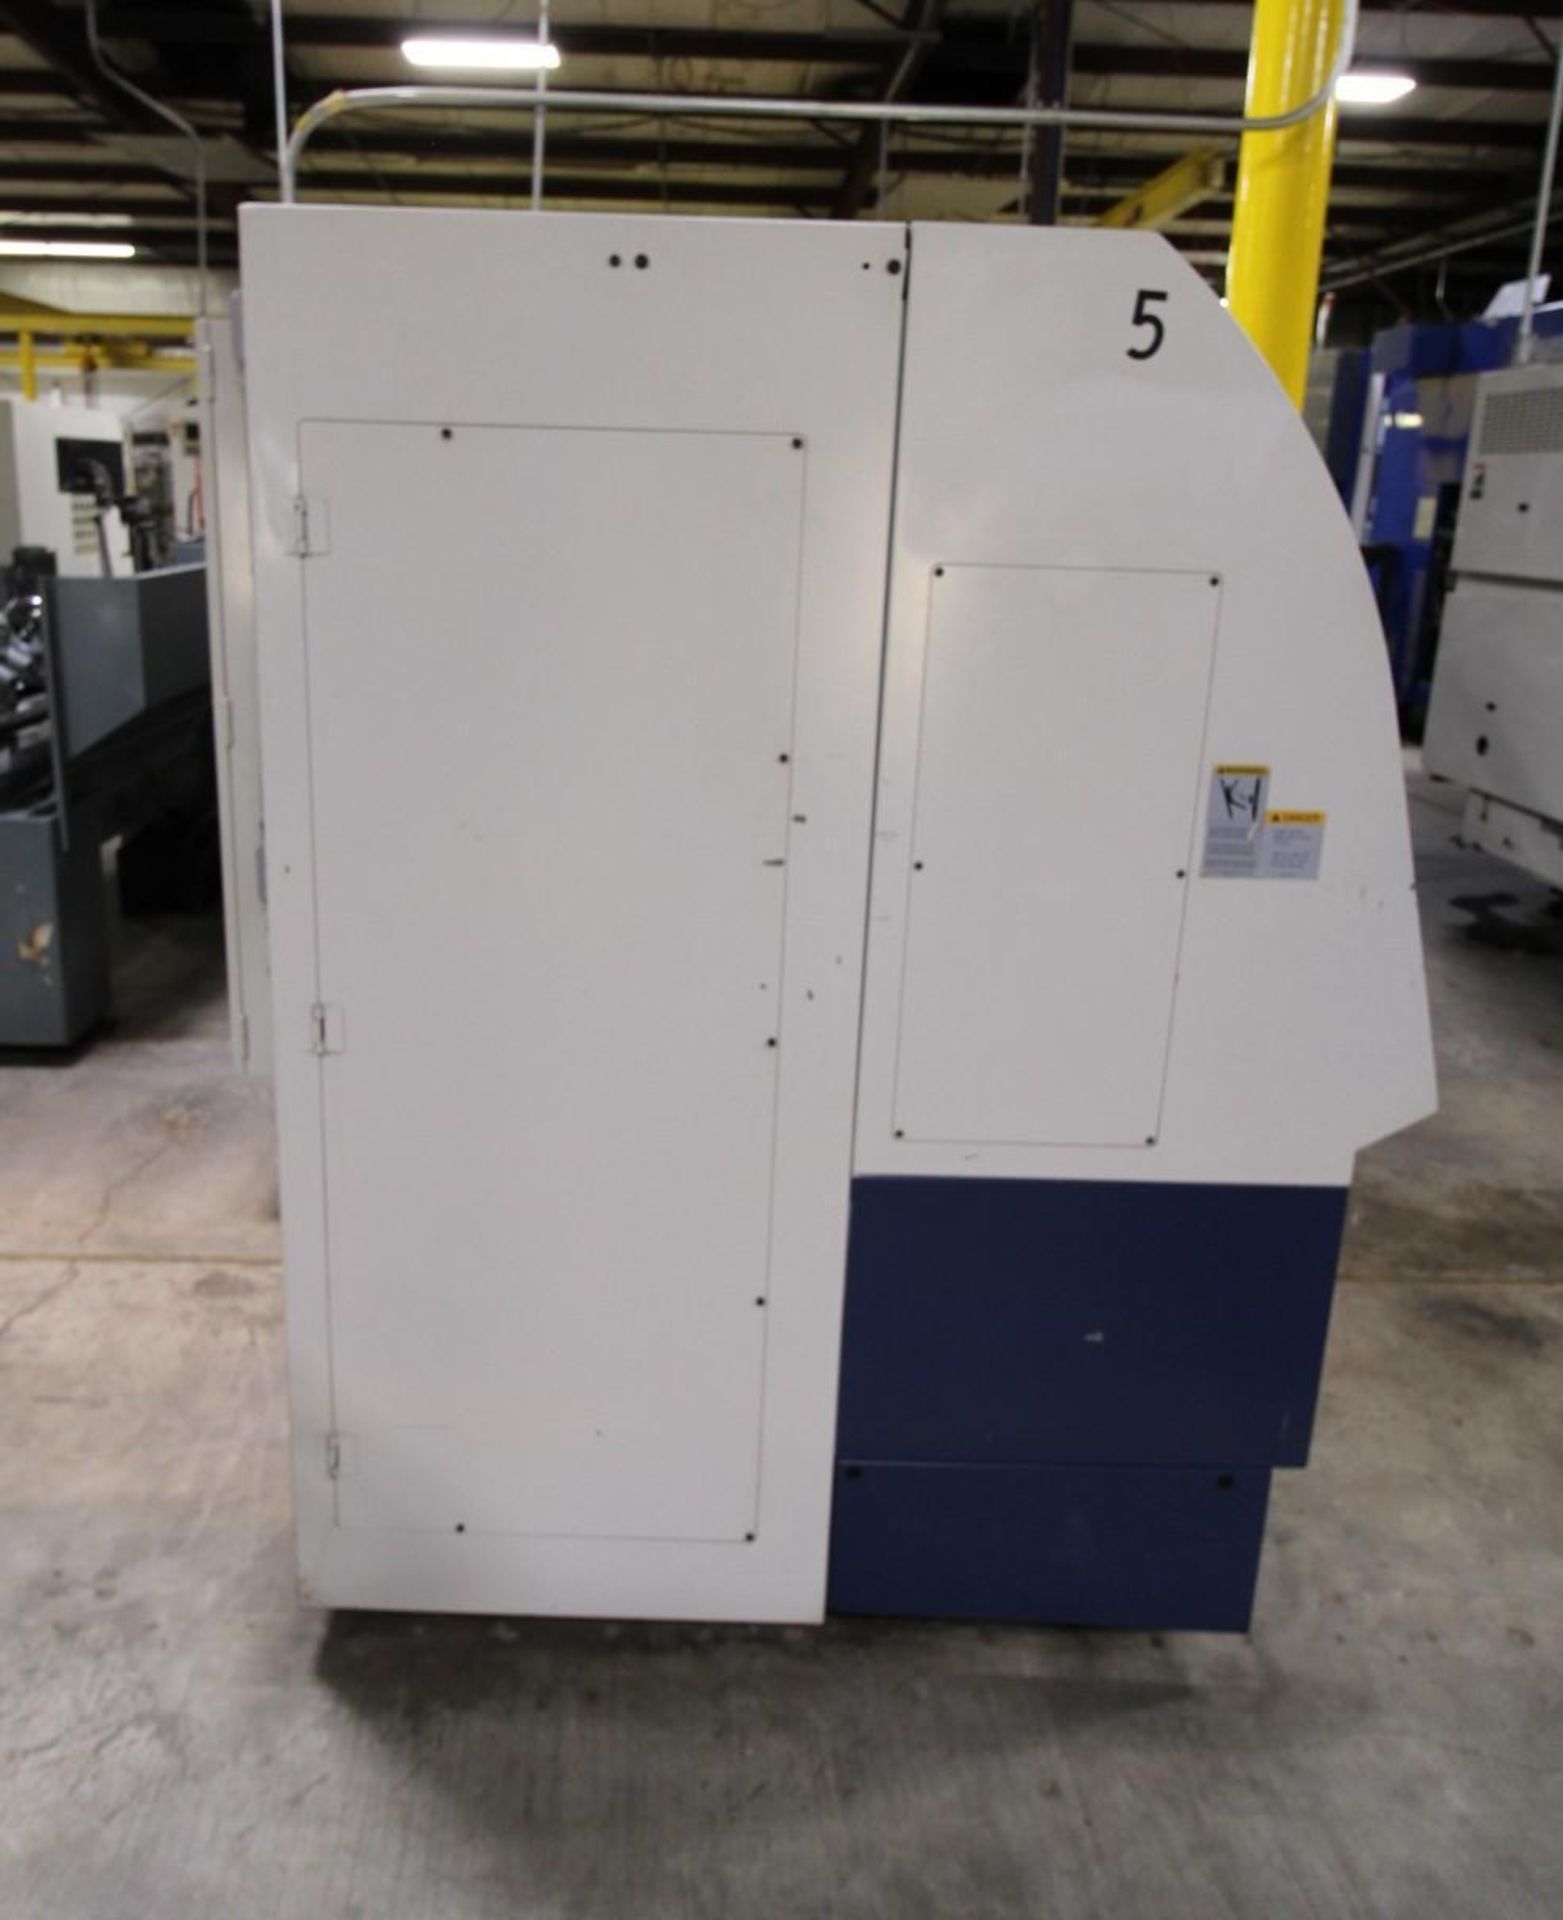 CNC LATHE, TOPPER MDL. TNL-130AL, new 2006, installed as new in 2010, Fanuc Oi-TC control, 3” bar - Image 4 of 17